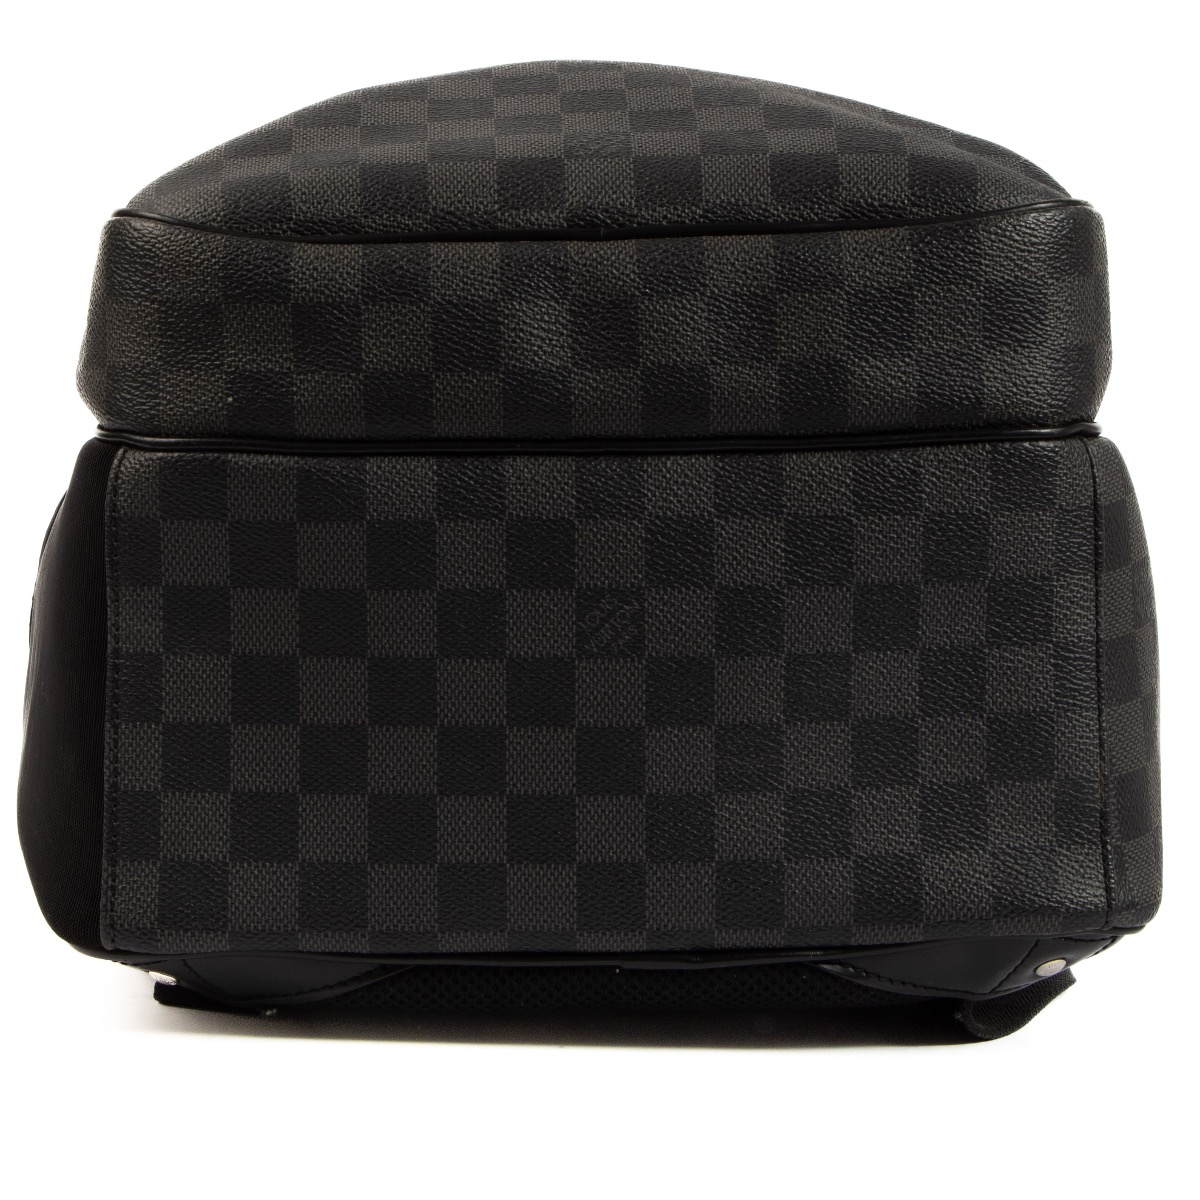 Louis Vuitton Michael Backpack NV2 Graphite Damier Graphite for